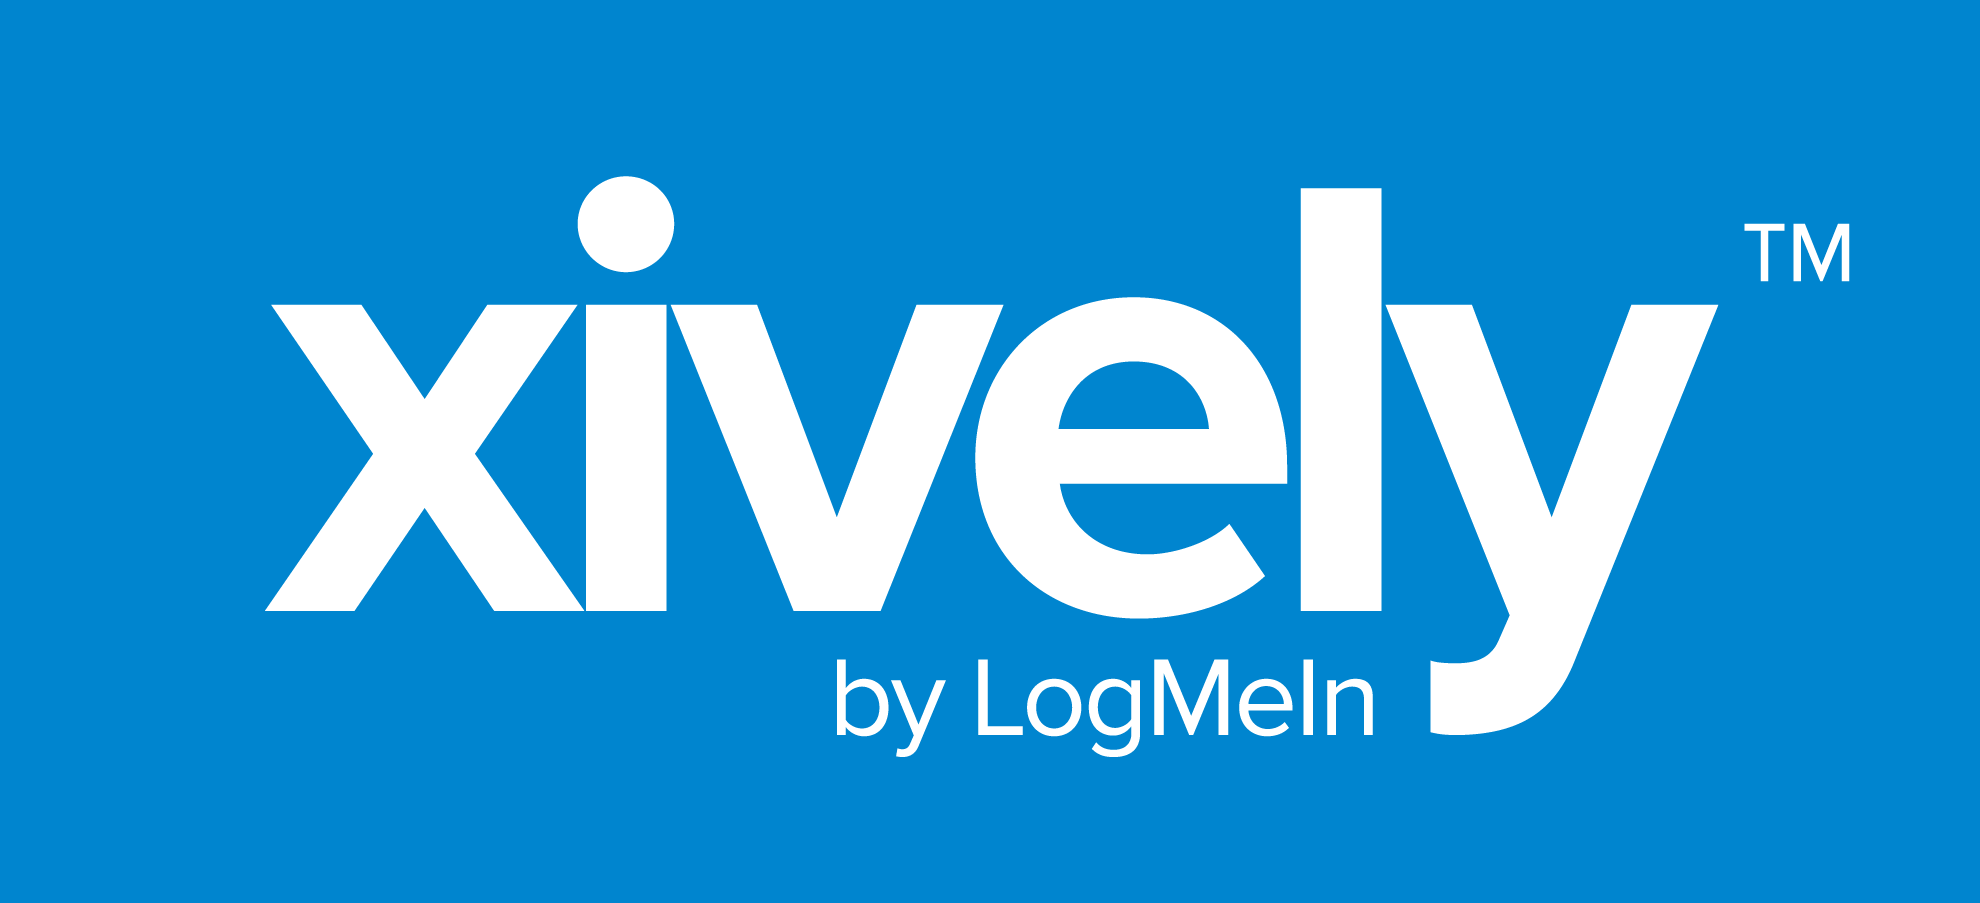 Log Me in Logo - Introducing Xively: LogMeIn's new Public Cloud for the IoT